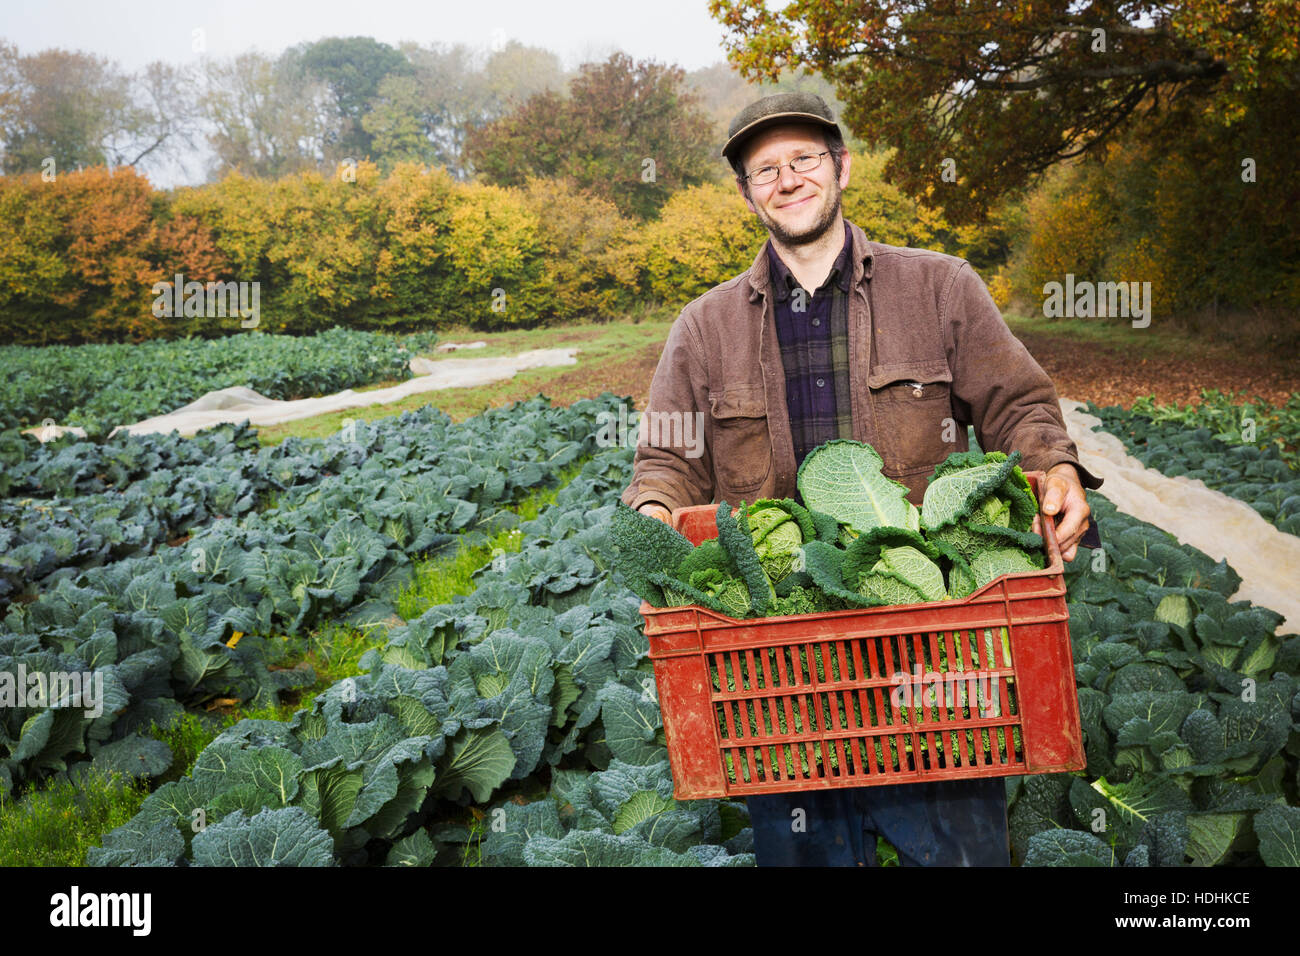 A man carrying a crate of fresh picked vegetables in a field. Stock Photo